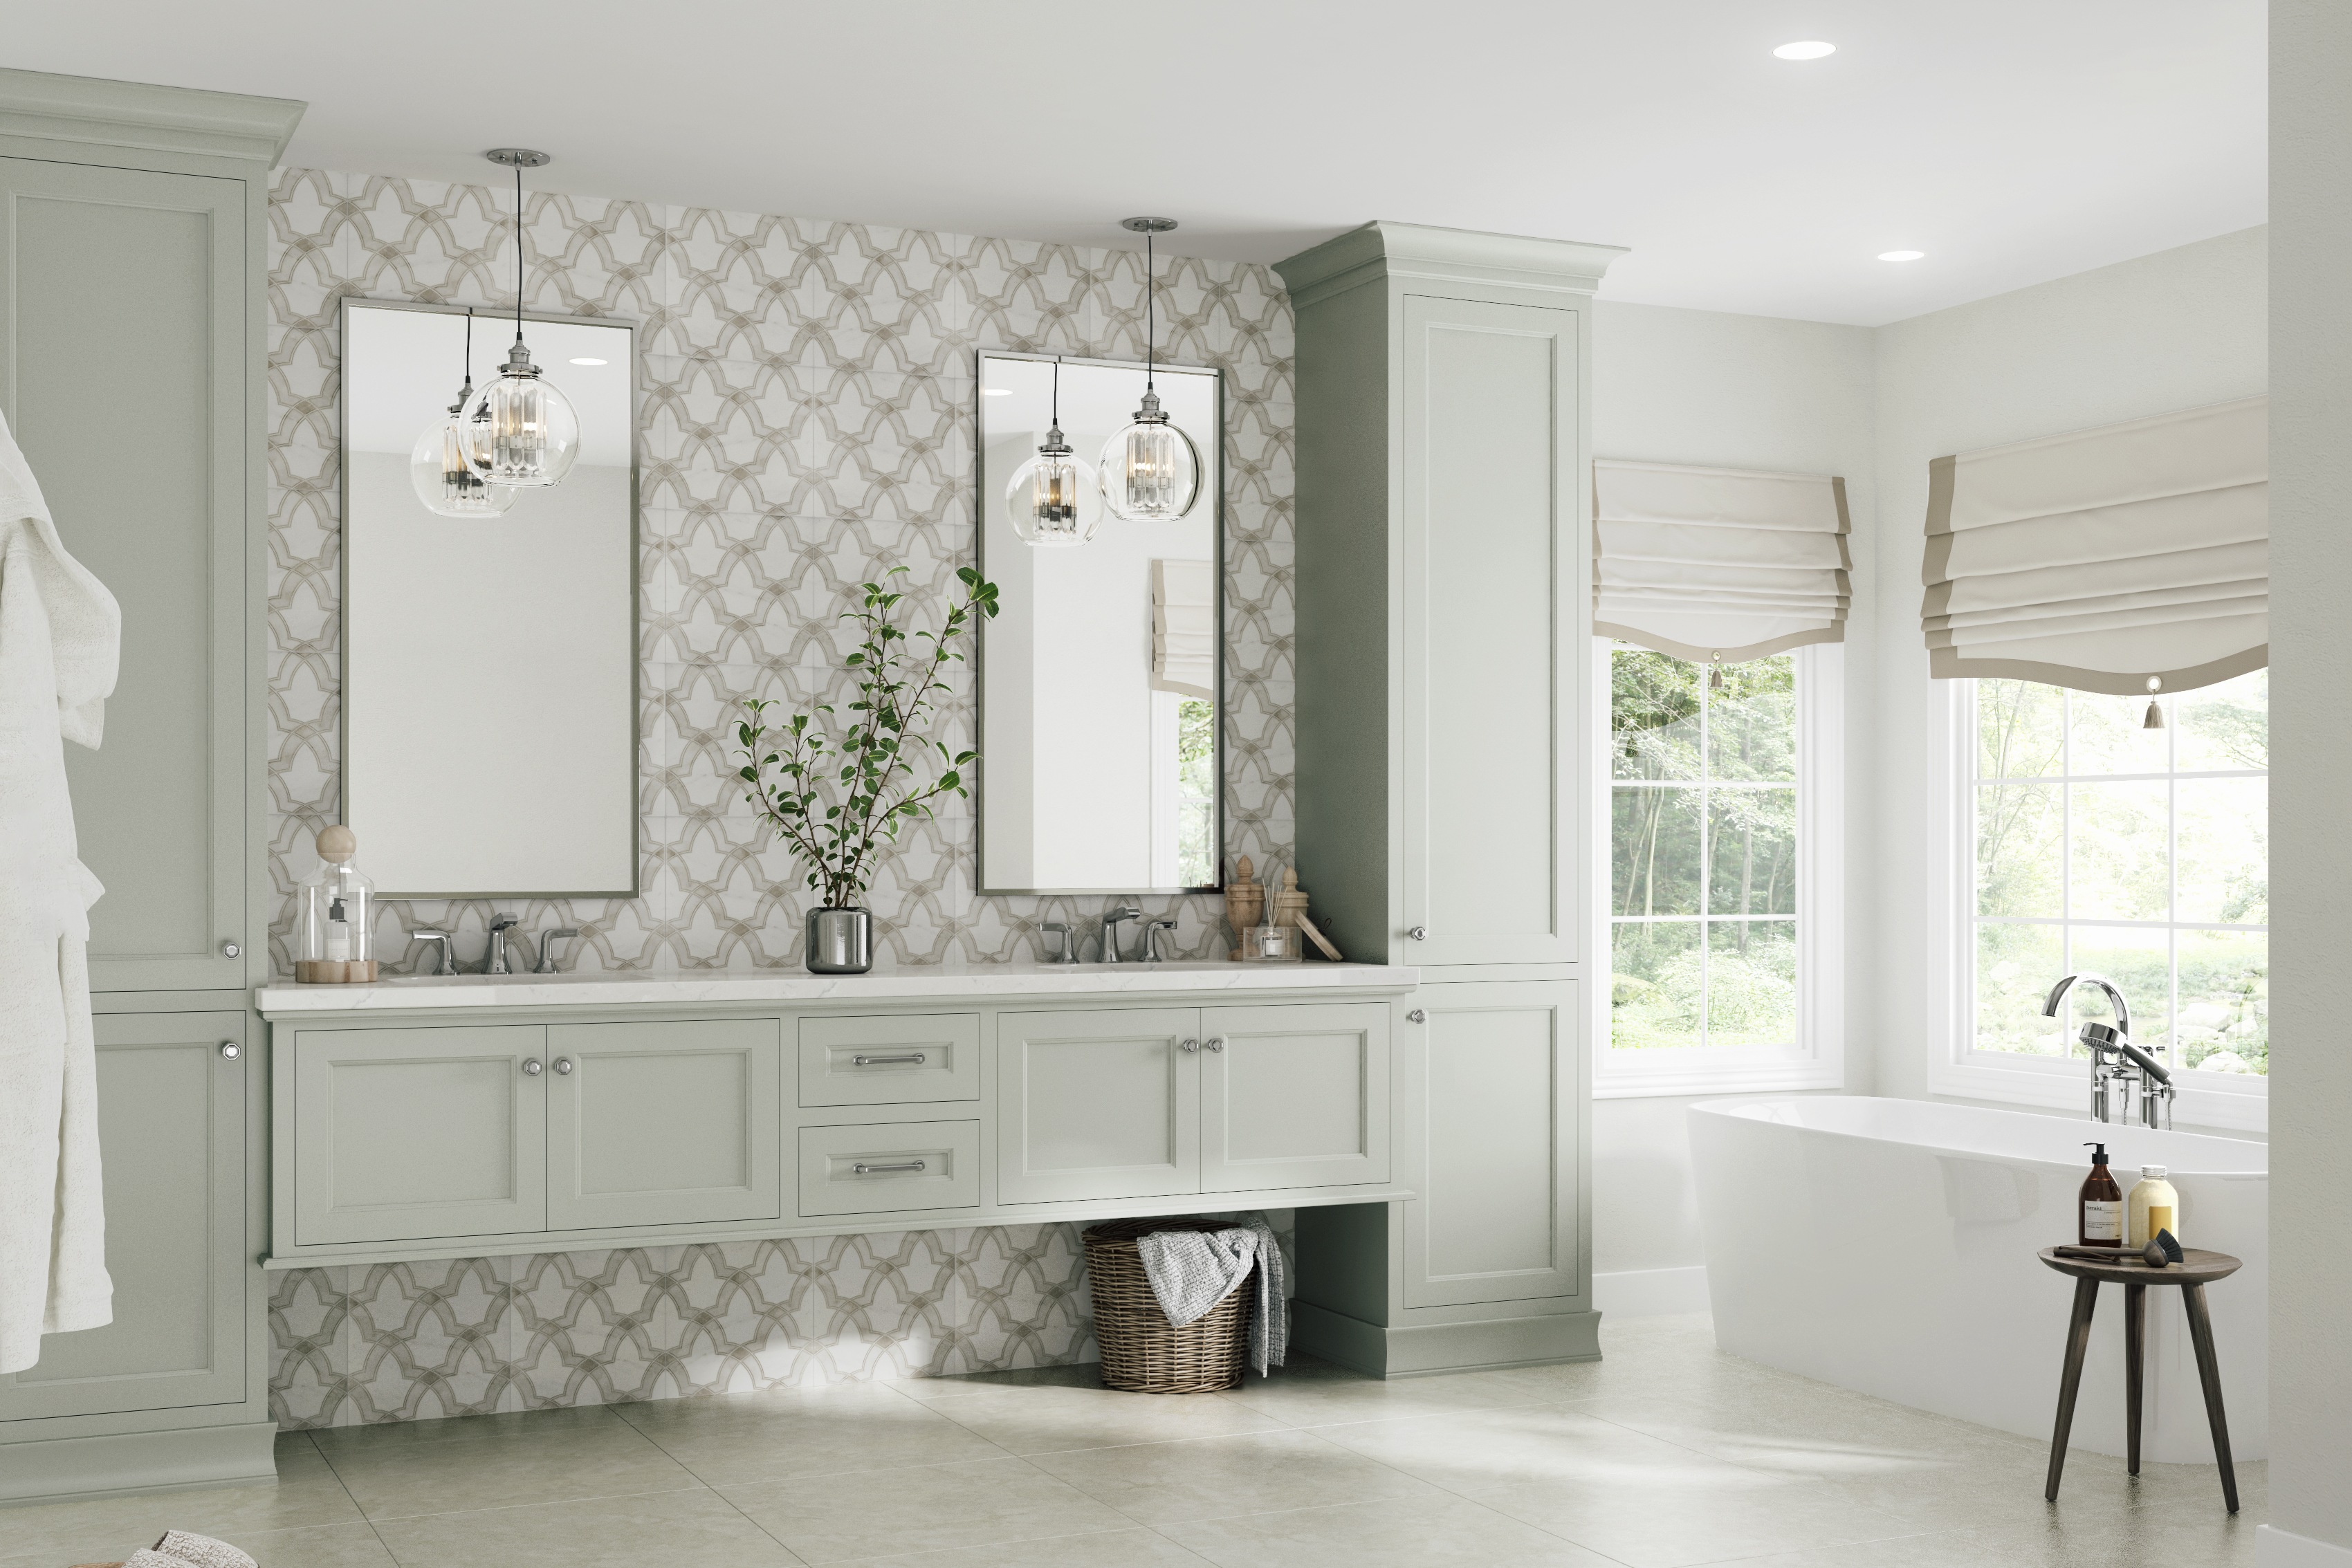 Dura Supreme vanity shown in the Meridien-Inset door style with a Personal Paint Match finish to “Silver Strand” (2019-2020 Curated Color) by Sherwin-Williams.